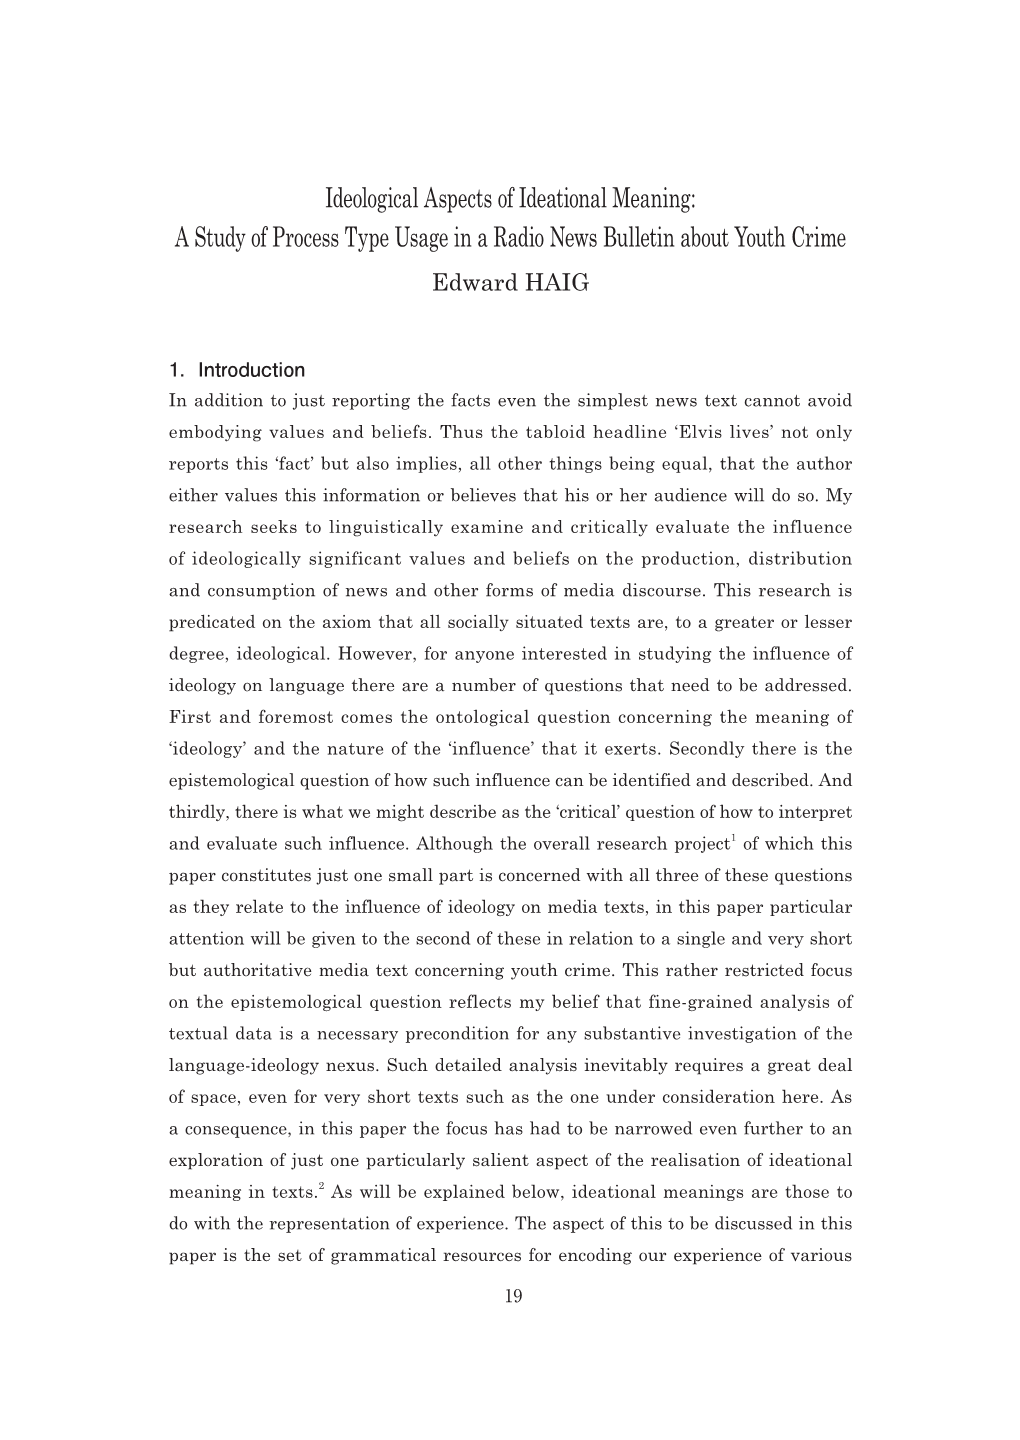 Ideological Aspects of Ideational Meaning: a Study of Process Type Usage in a Radio News Bulletin About Youth Crime Edward HAIG